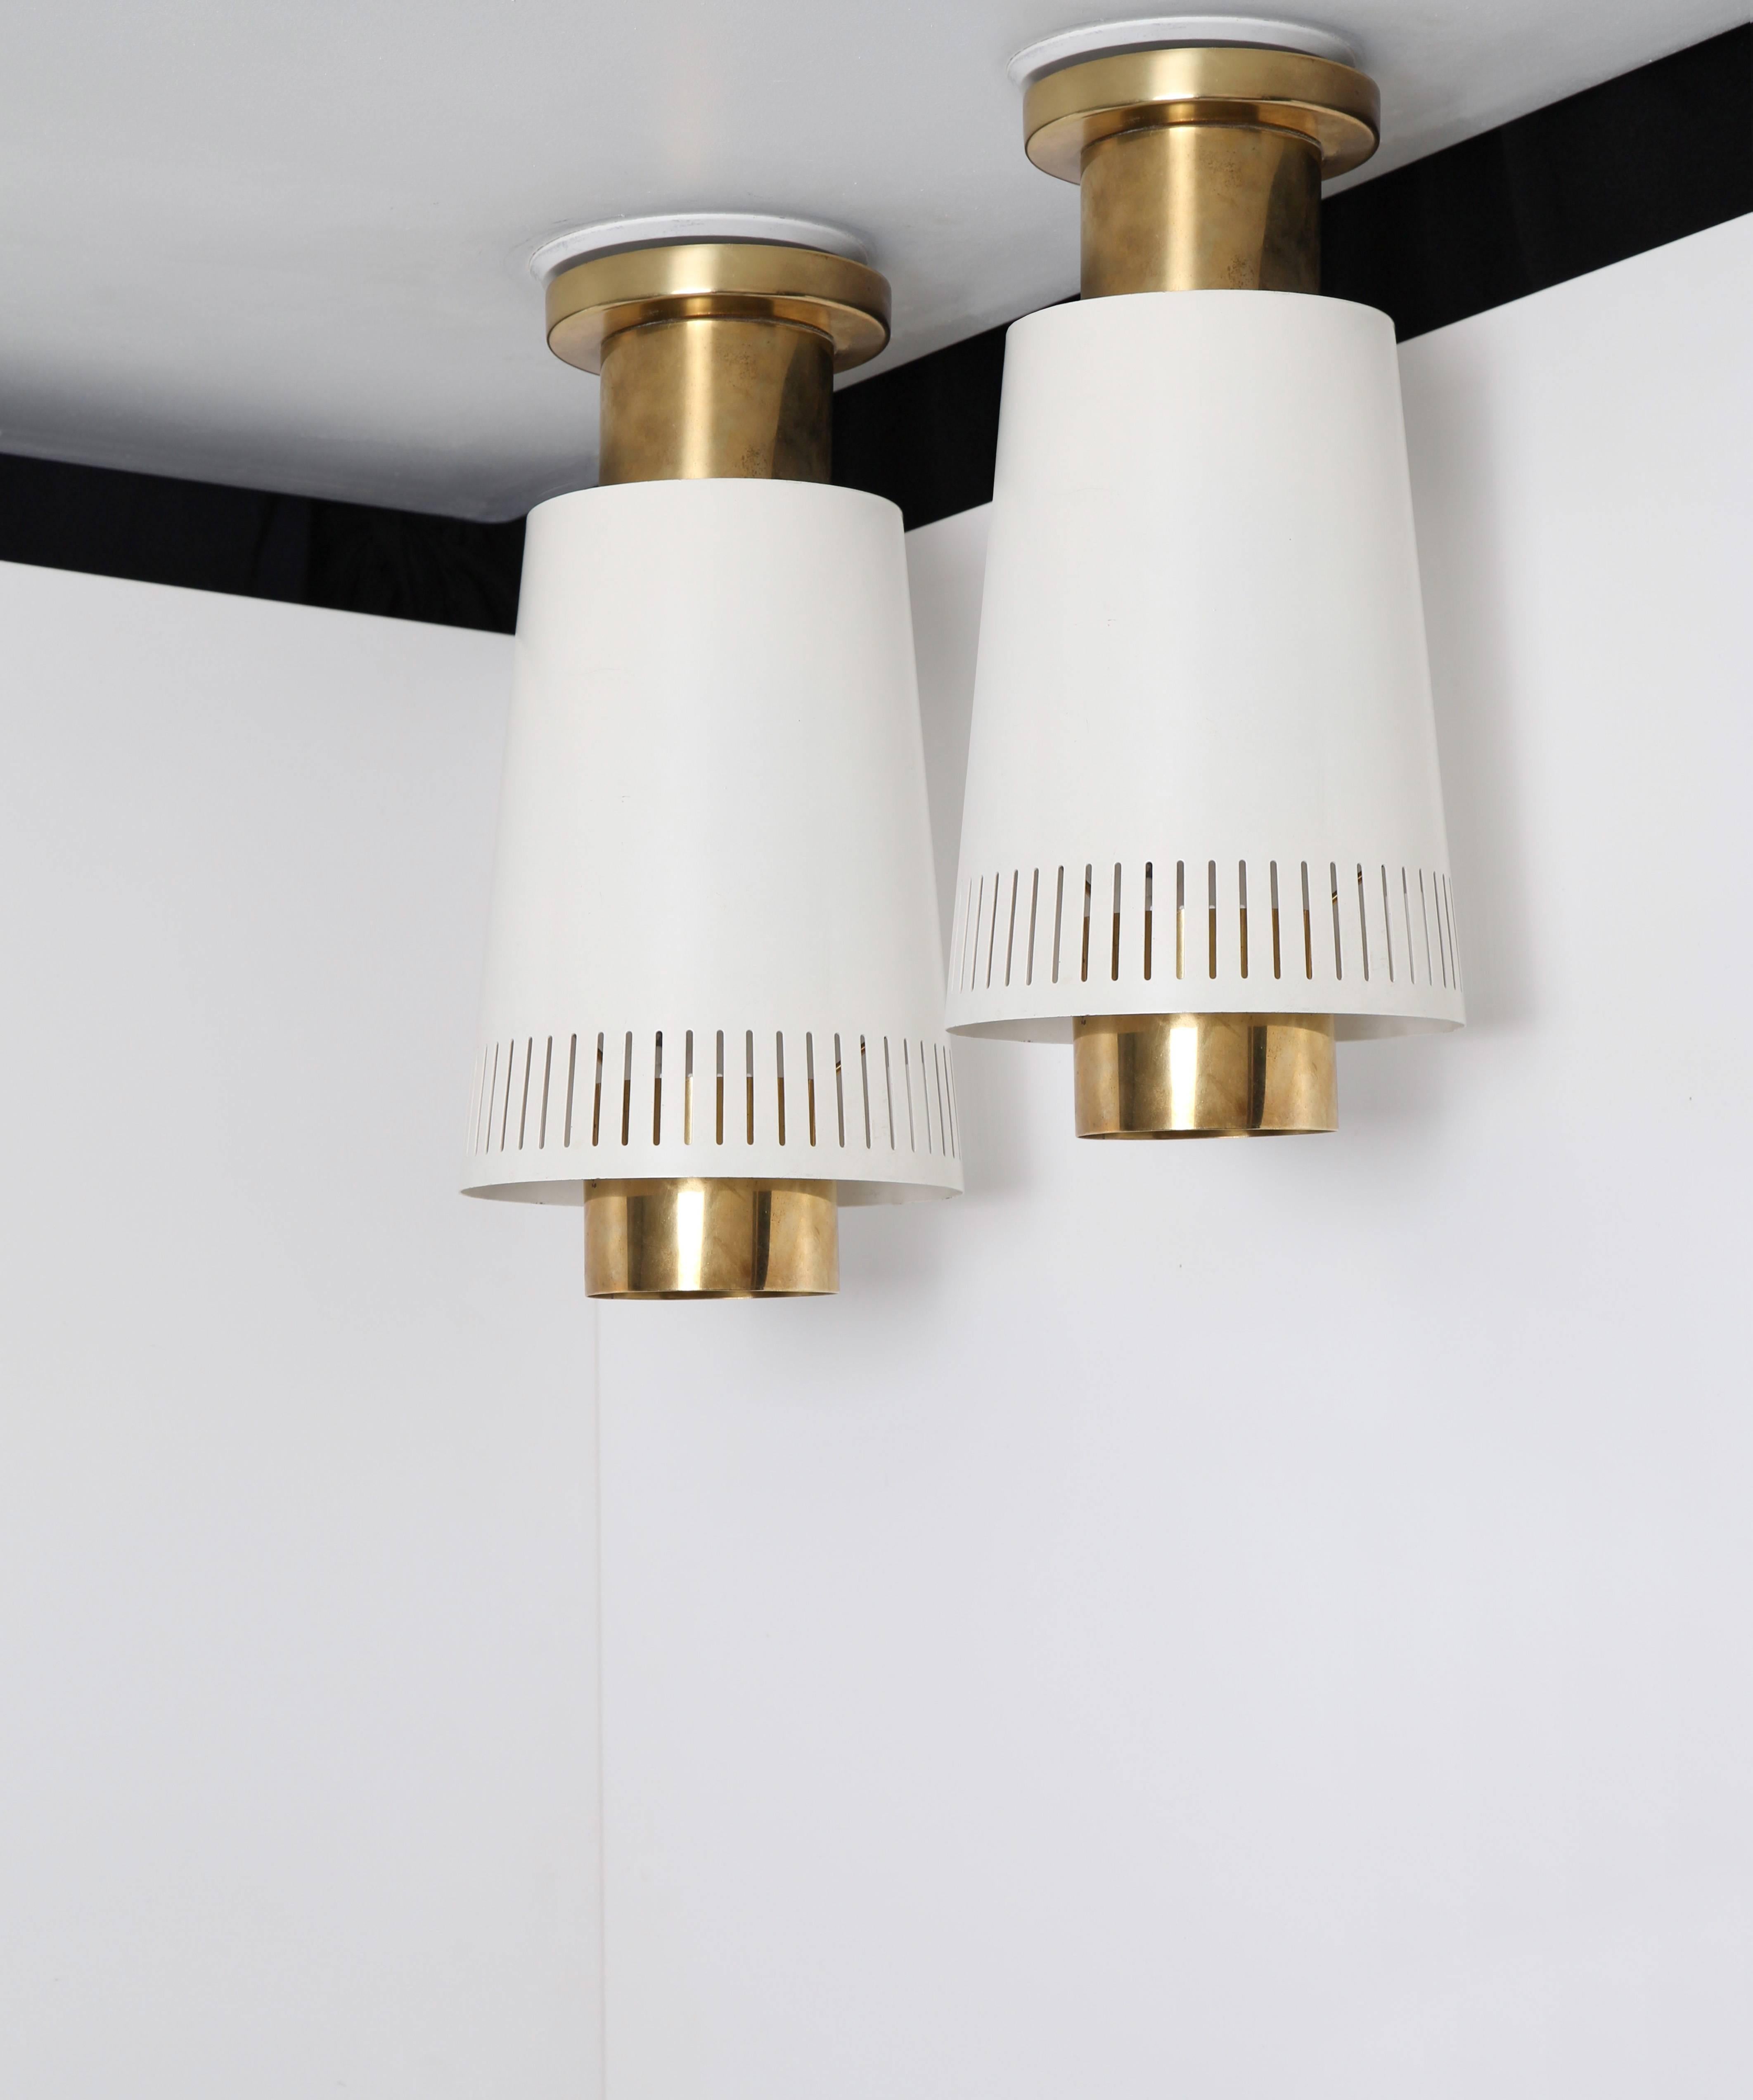 Pair of mounted ceiling lamps by Paavo Tynell, model no.9067. 

Finland, circa 1950s.
Manufacturer Idman Oy.

Impressed with manufacturer's mark [Idman]. 
Brass and white painted metal with stripe perforation pattern.

12.9 height x 6.2